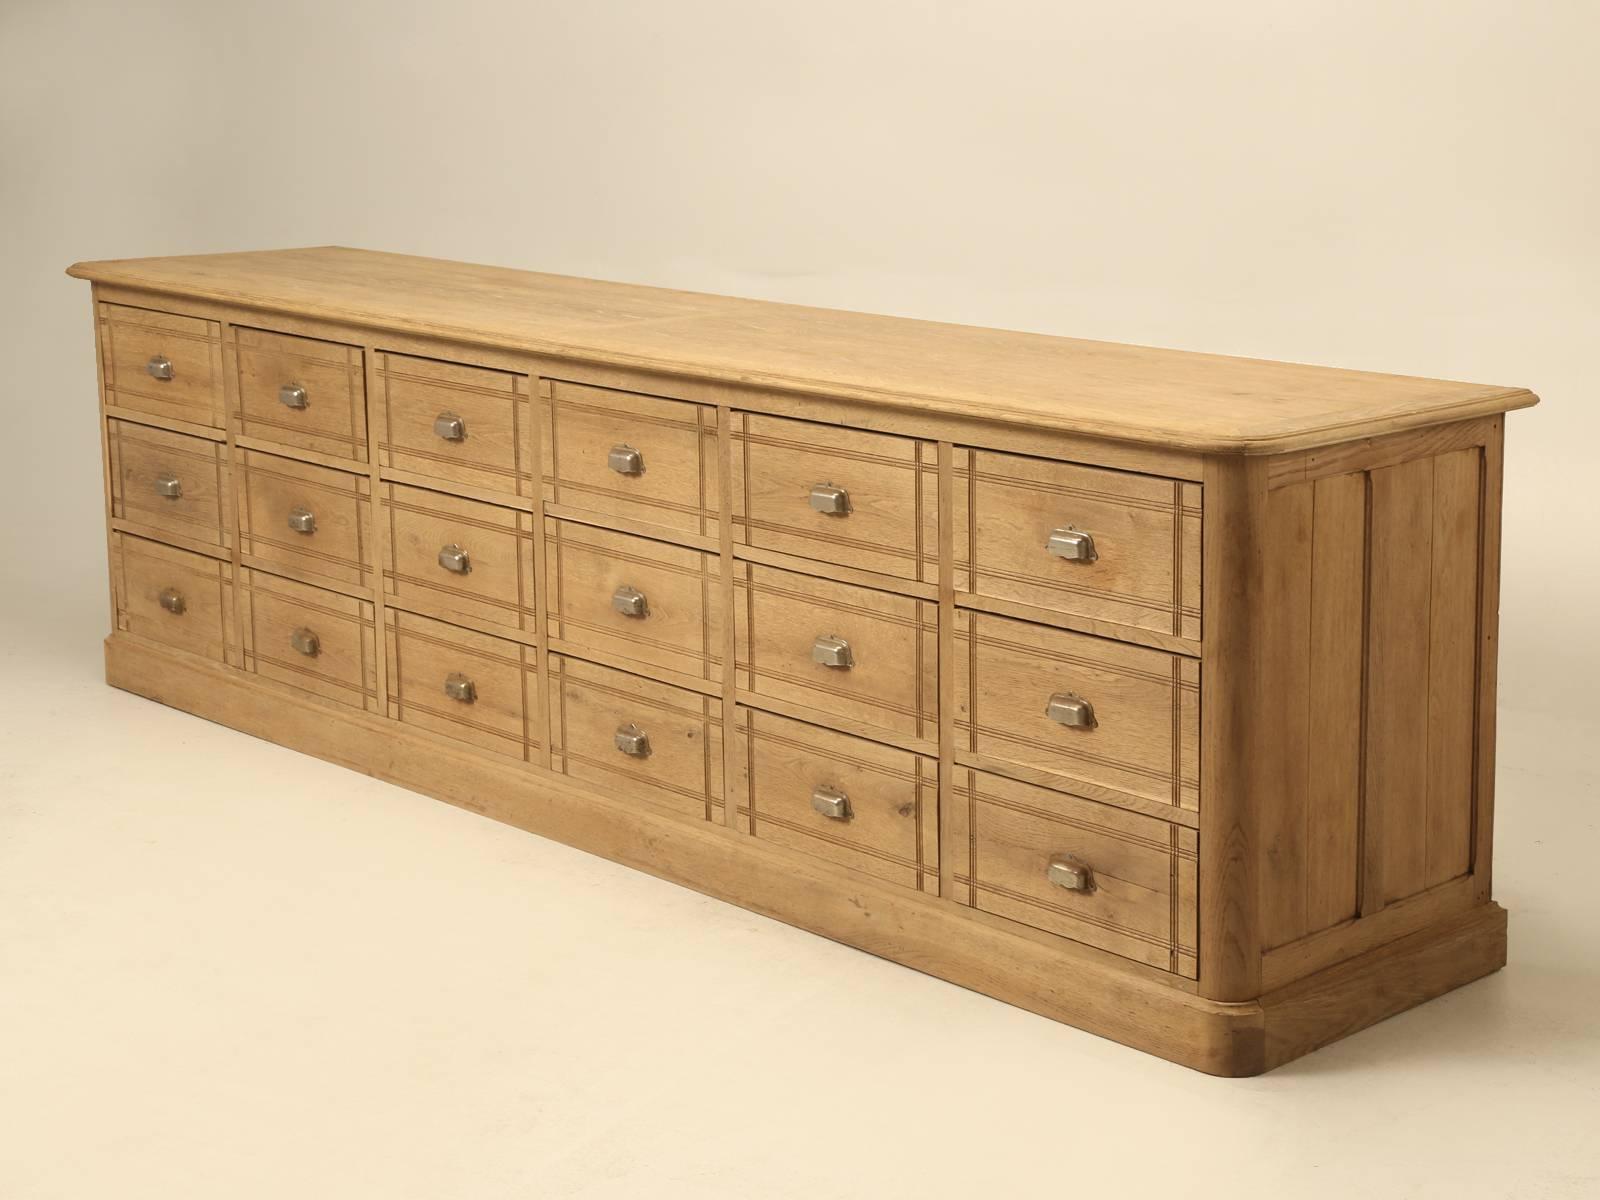 Wonderful turn of the century store fitting, or as the Brit’s might commonly refer to as a, bank of drawers. Generally, when you find old store pieces they are made from pine and have been given a quick coat of paint. Apparently, this probably came